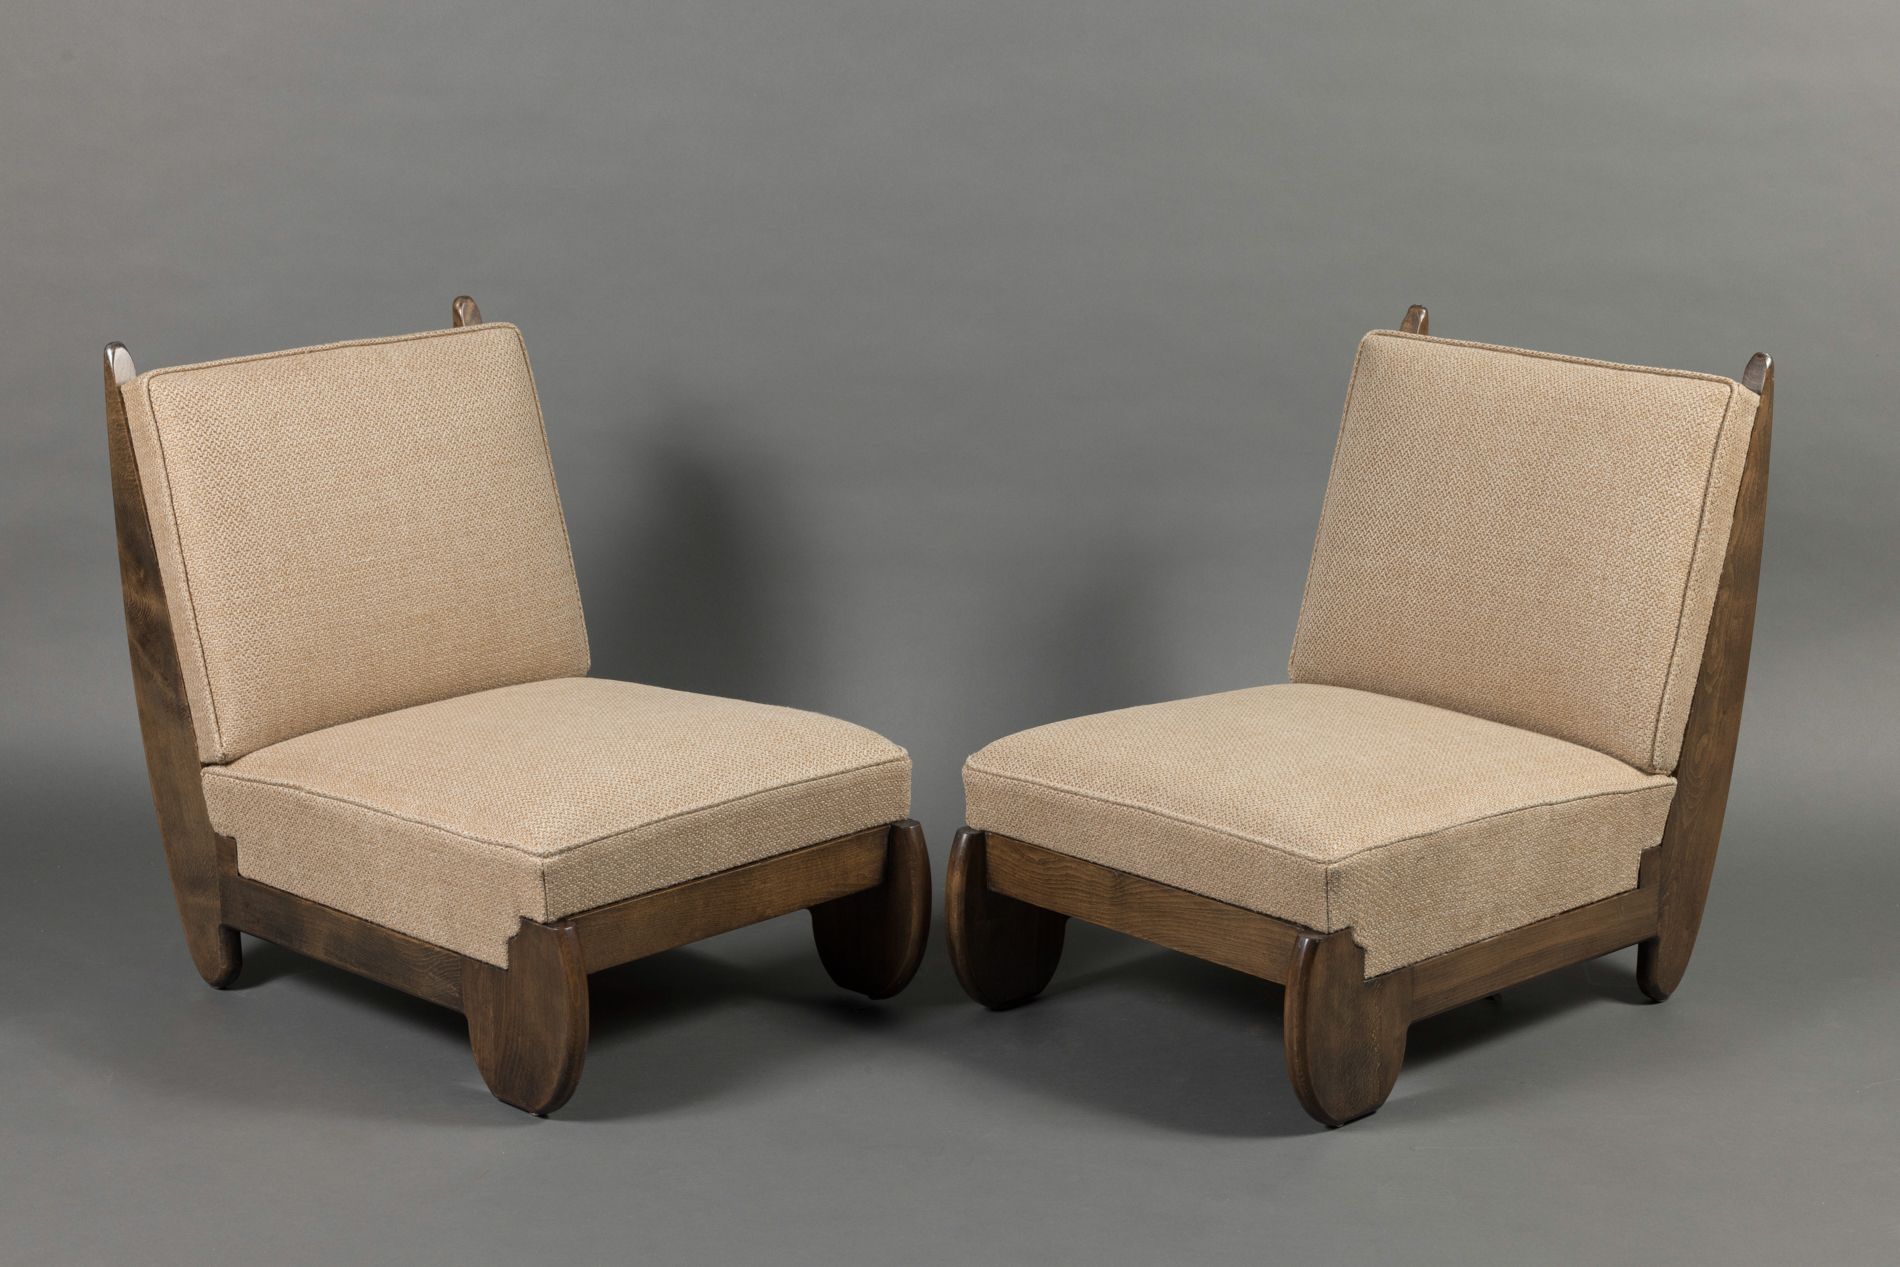 Null Paul LASZLO (1900-1993) 
Pair of armchairs in stained sycamore. 
Mottled fa&hellip;